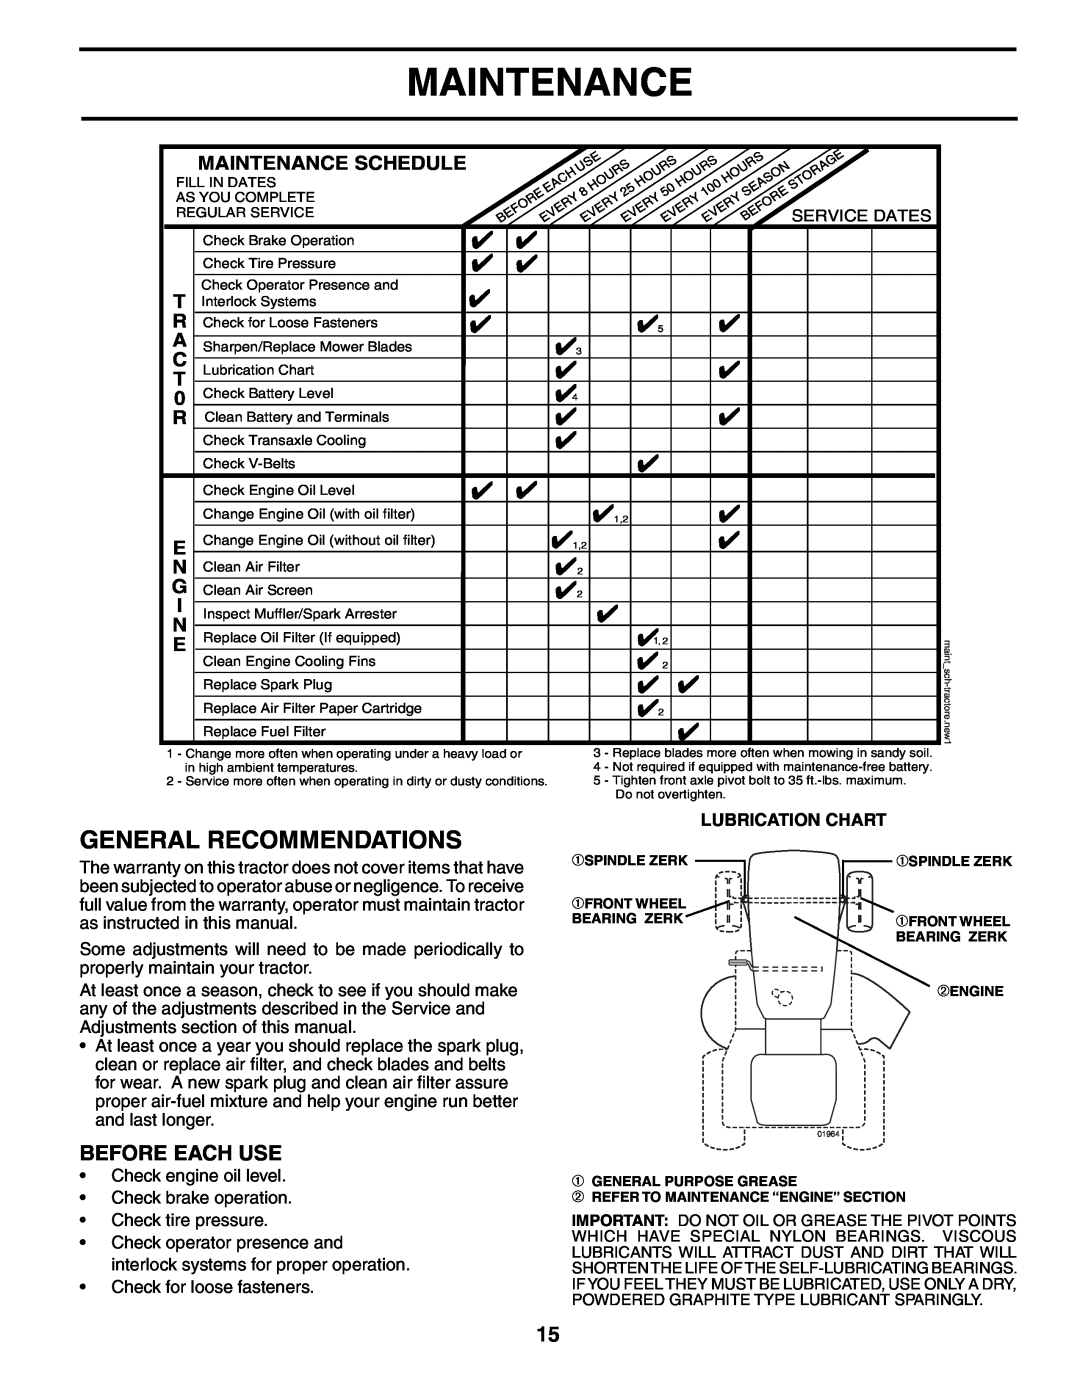 Poulan PR20PH42STD owner manual General Recommendations, Before Each Use, Maintenance Schedule 